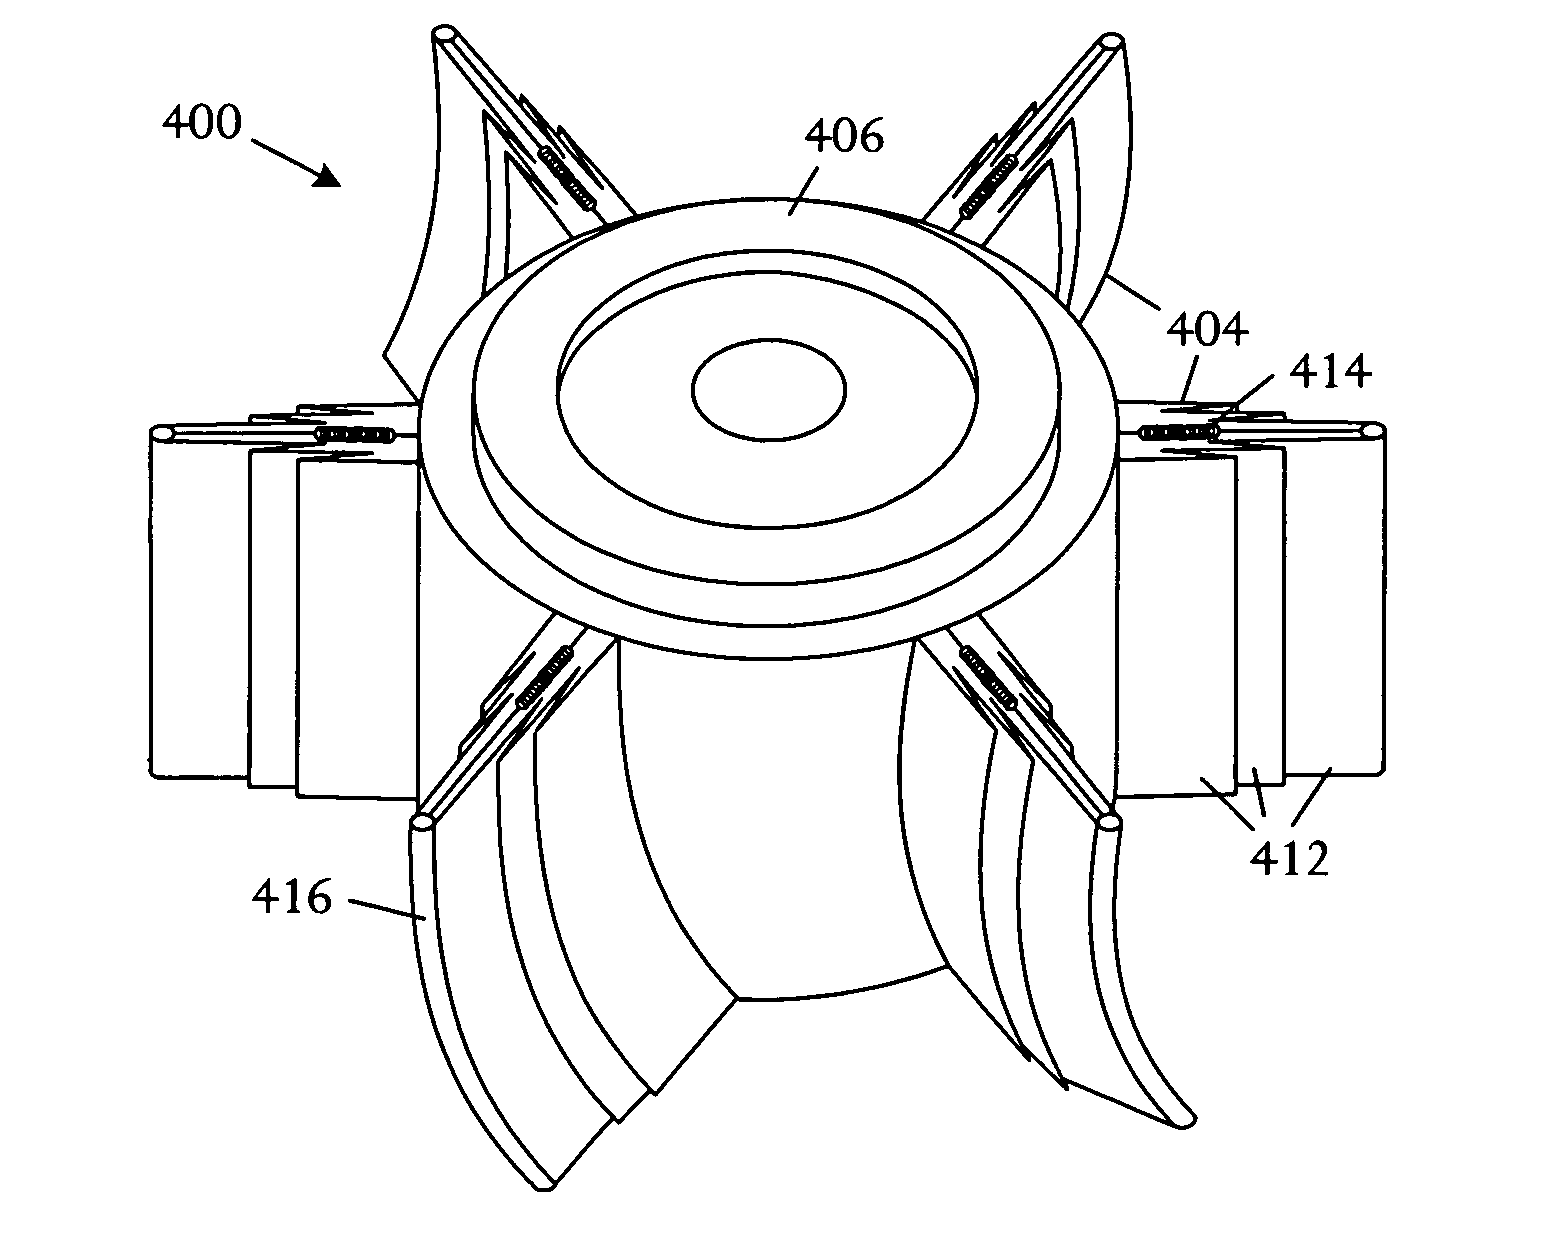 Electronics cooling fan with collapsible fan blade